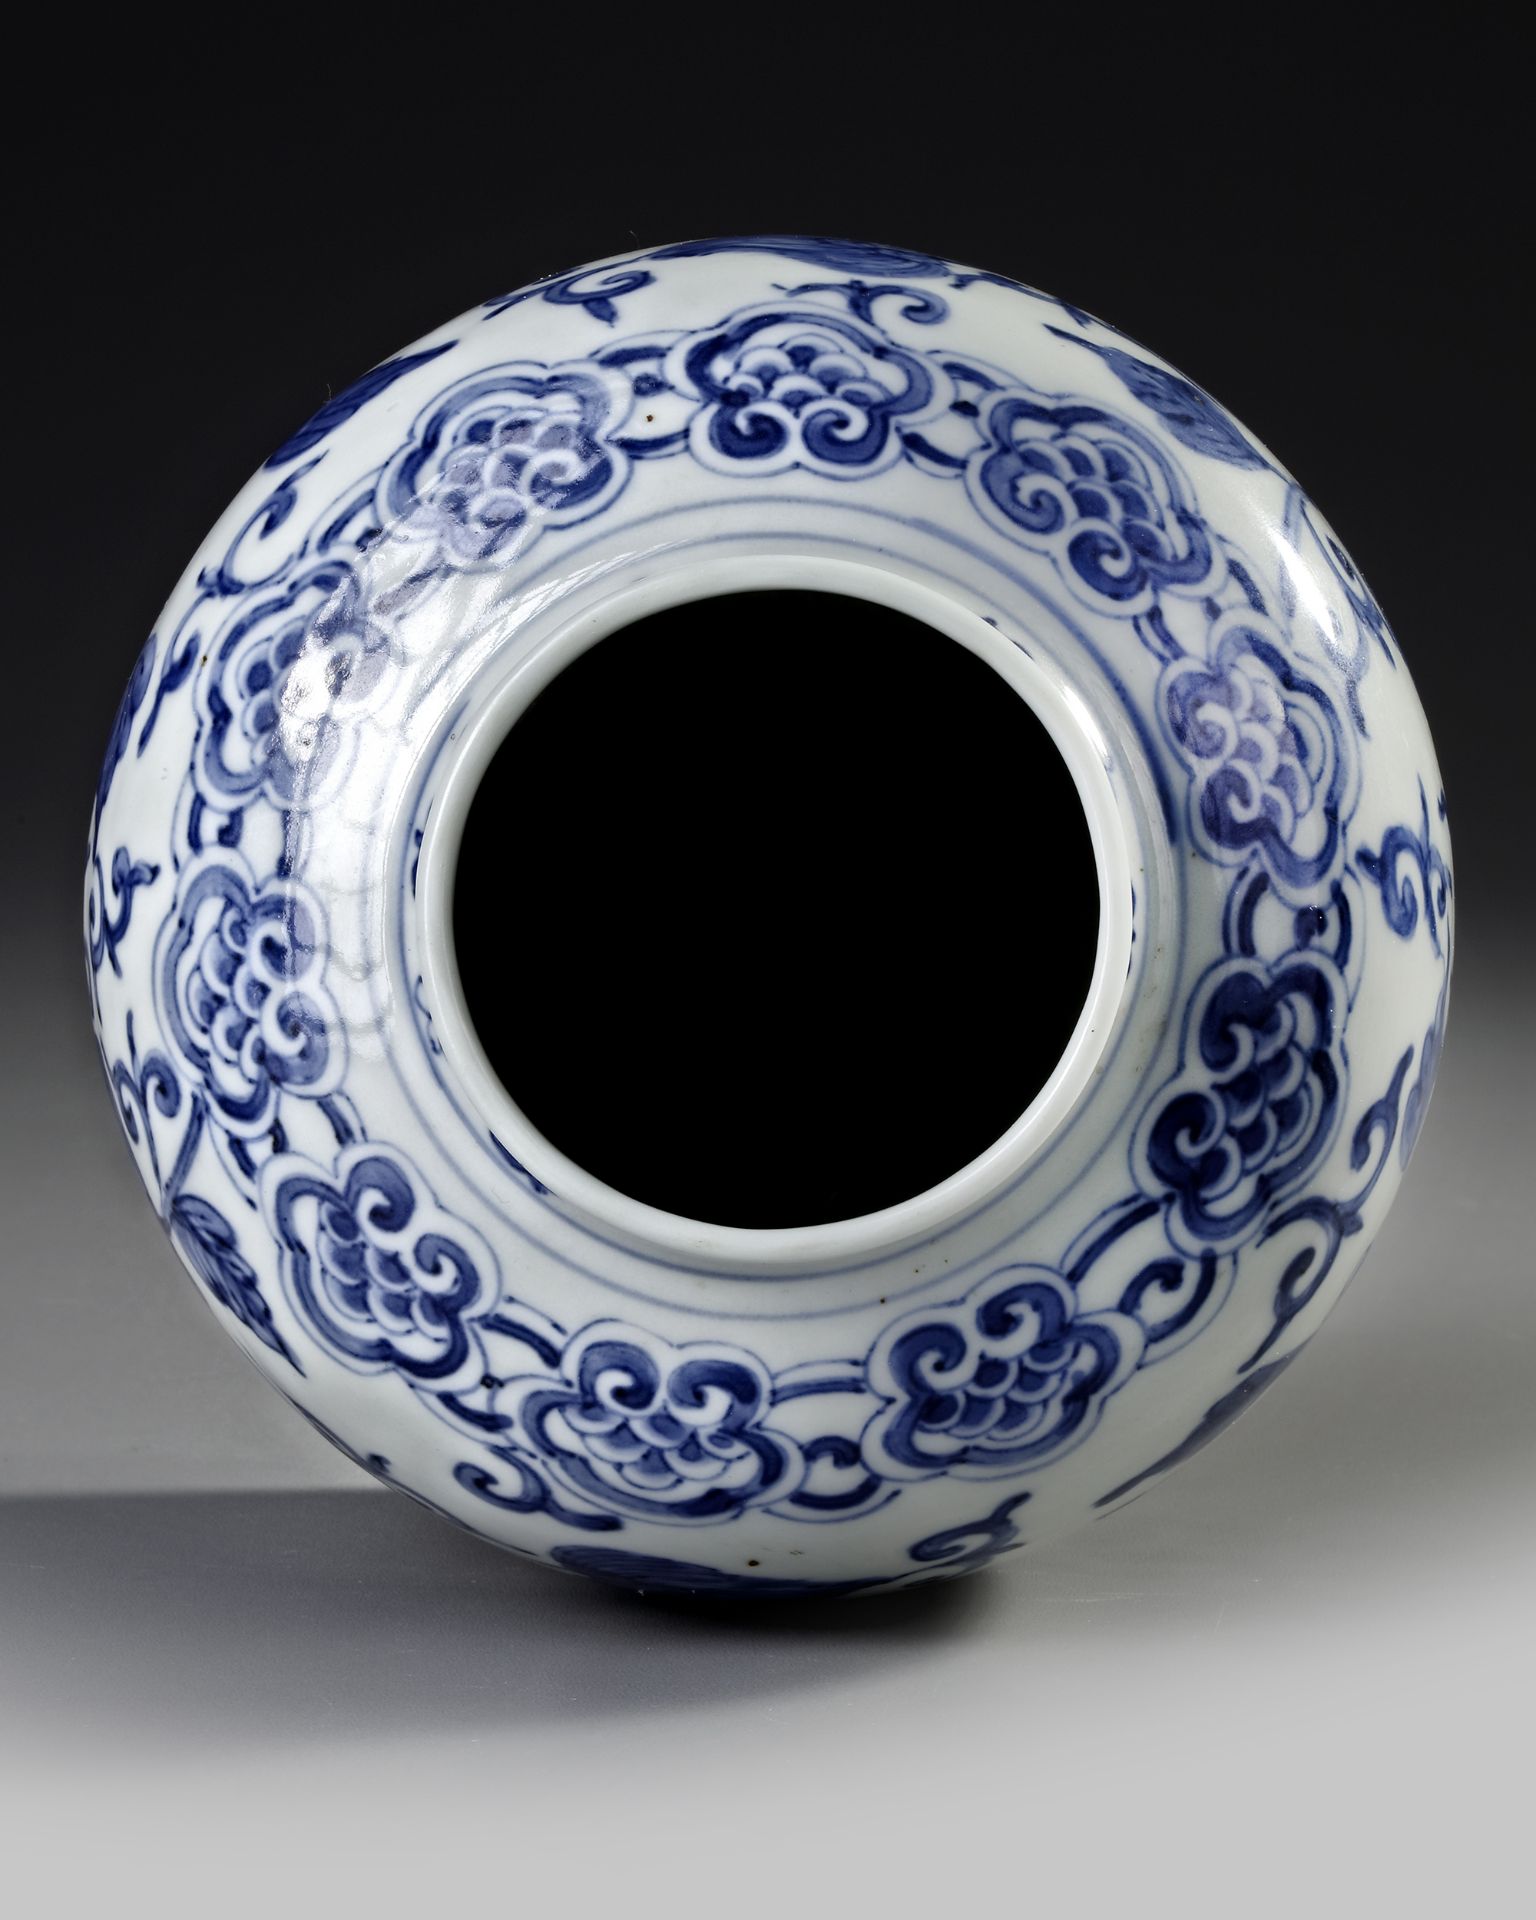 A CHINESE BLUE AND WHITE JAR, MING DYNASTY (1368-1644) OR LATER - Image 7 of 10